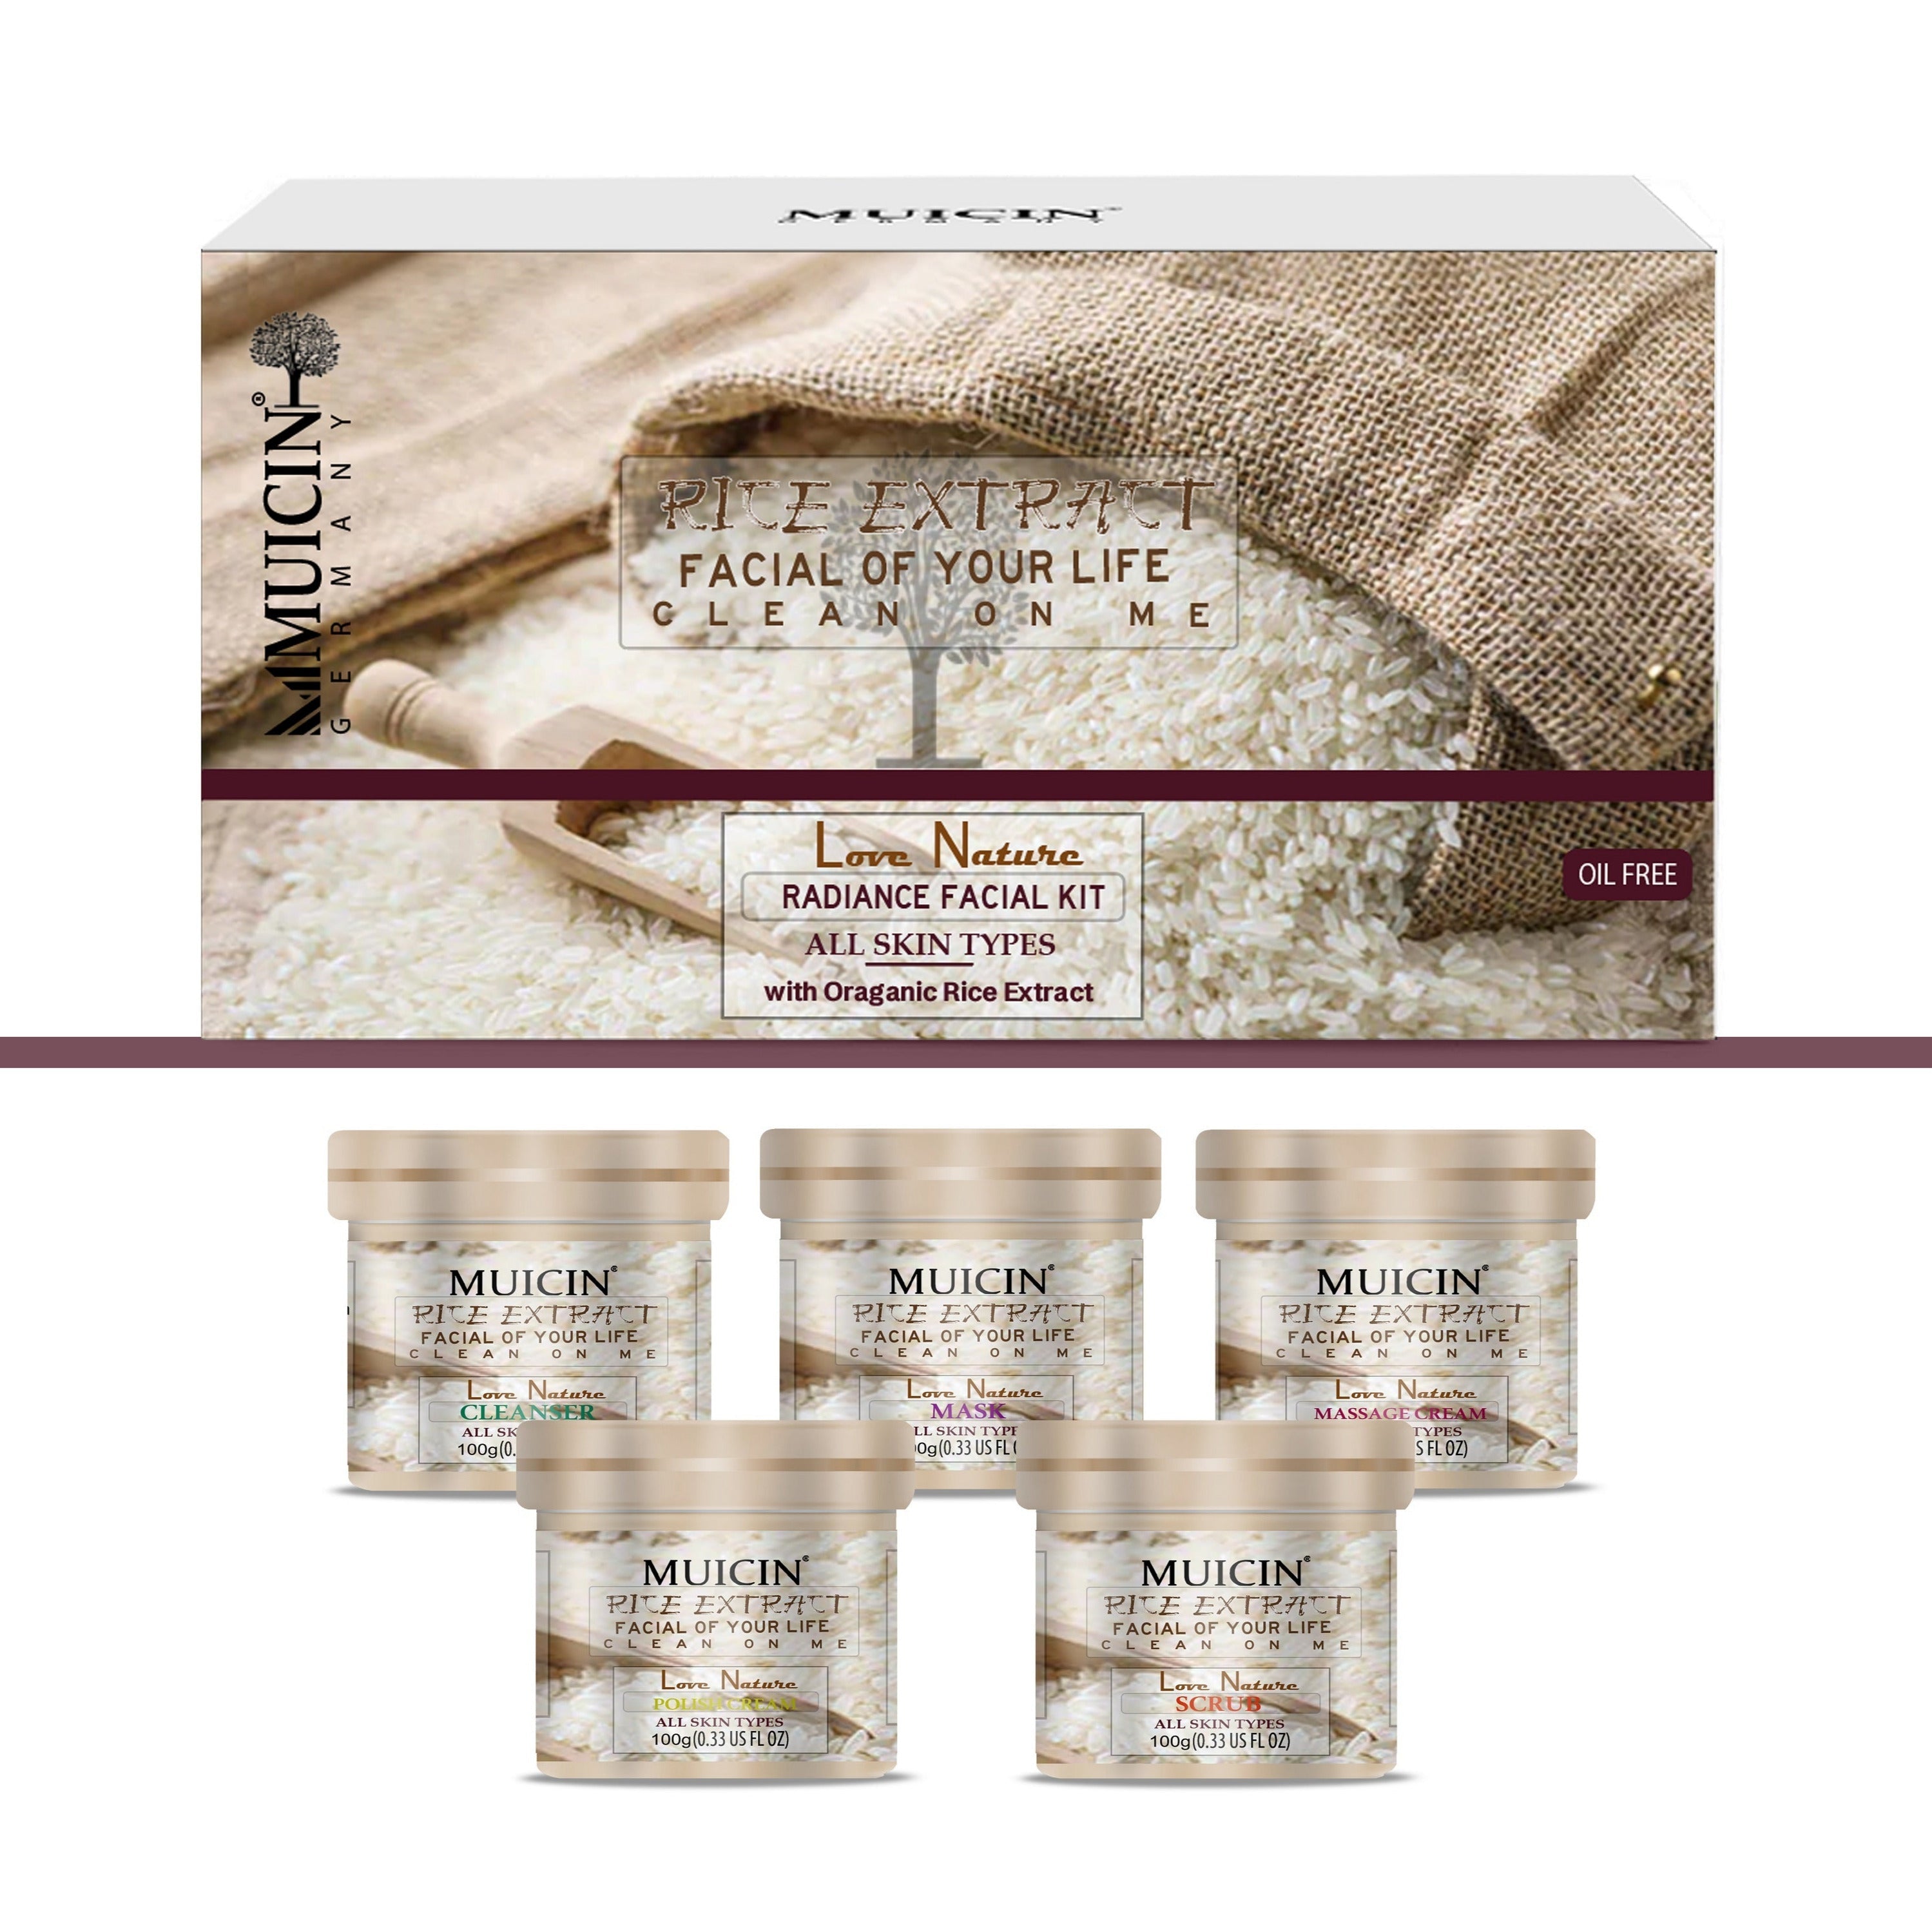 RICE EXTRACT ILLUMINATING FACIAL KIT - 5 STEPS - GENTLE GLOW REVIVAL